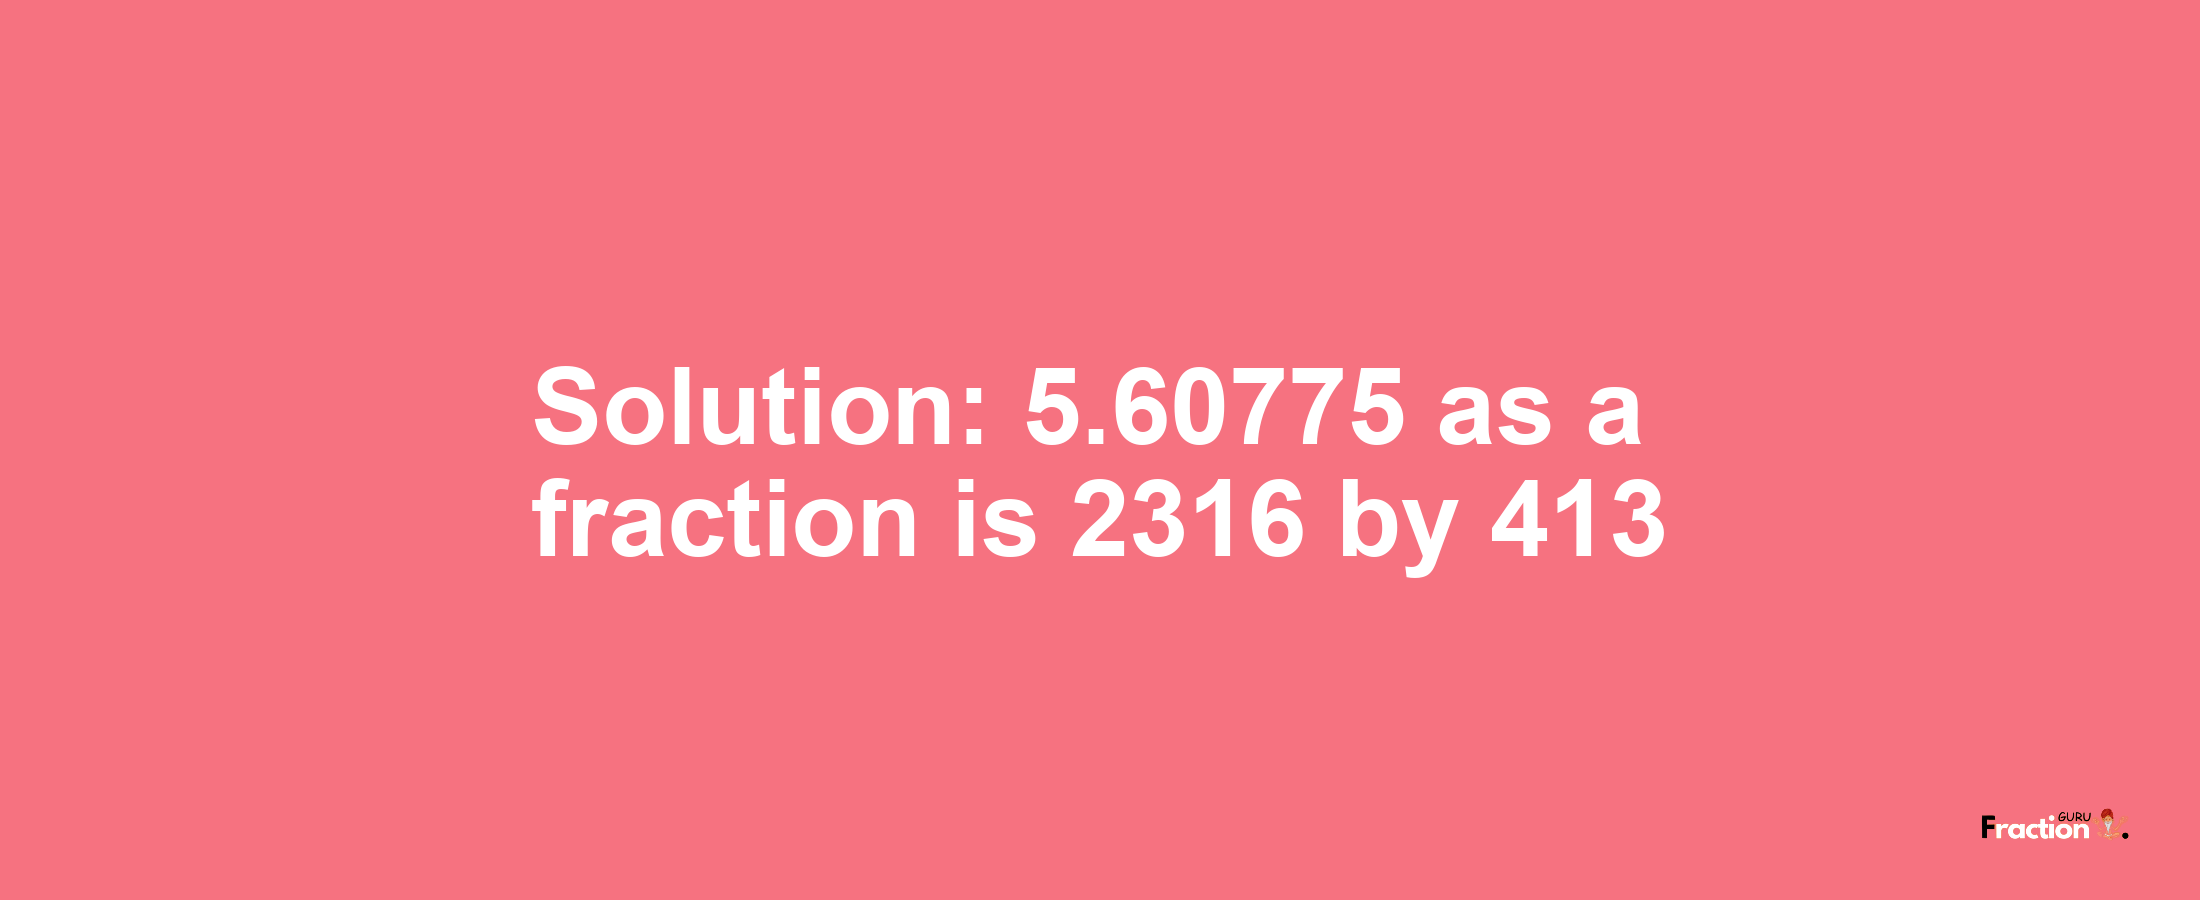 Solution:5.60775 as a fraction is 2316/413